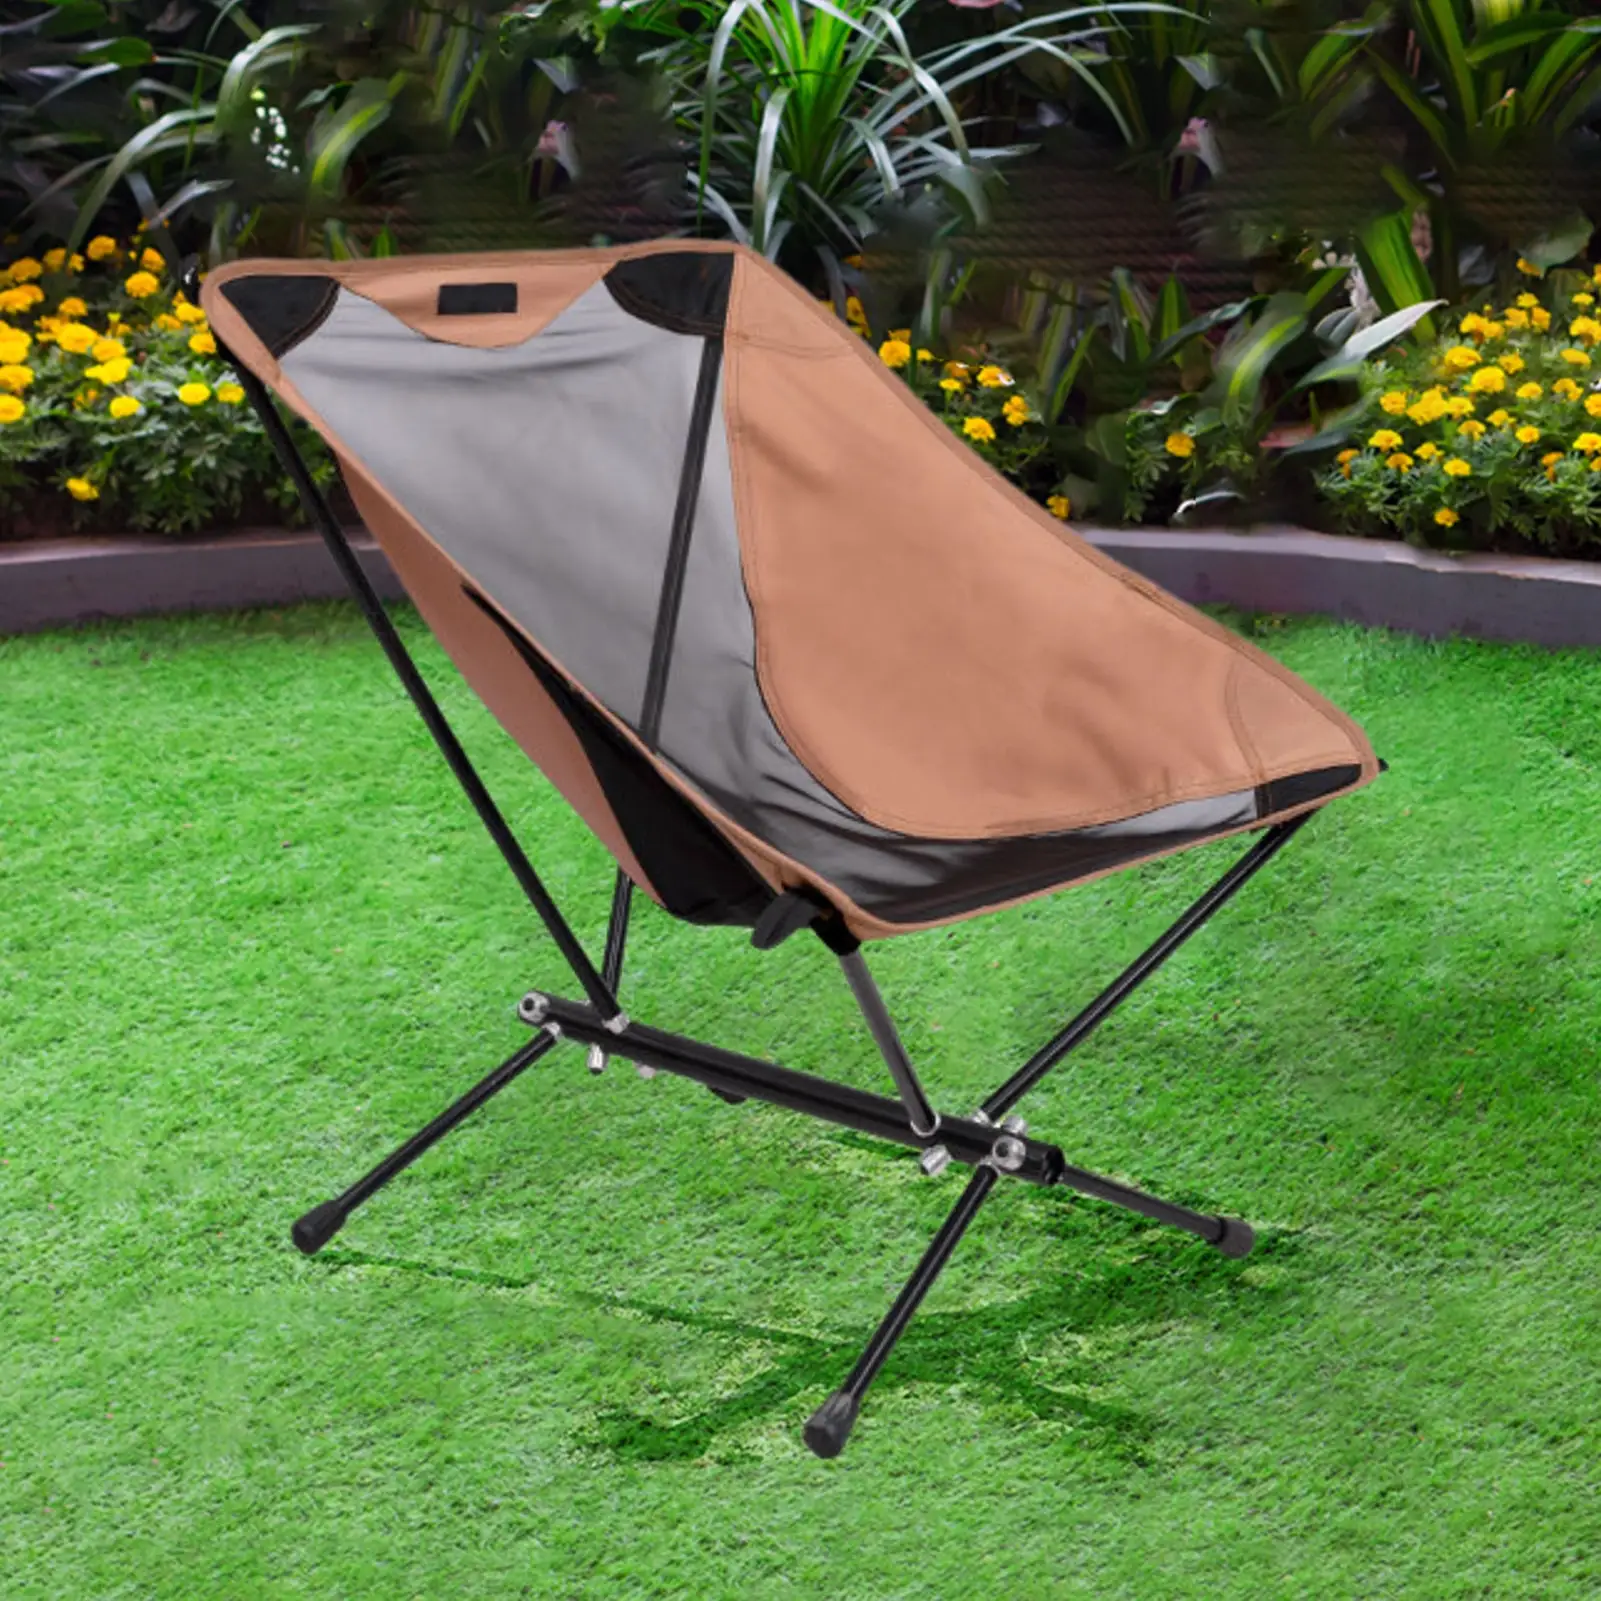 Portable Camping Chair Folding Chairs For Outside Lightweight And Compact Chairs Backpacking Chair For Outdoor Hiking Picnic enlarge